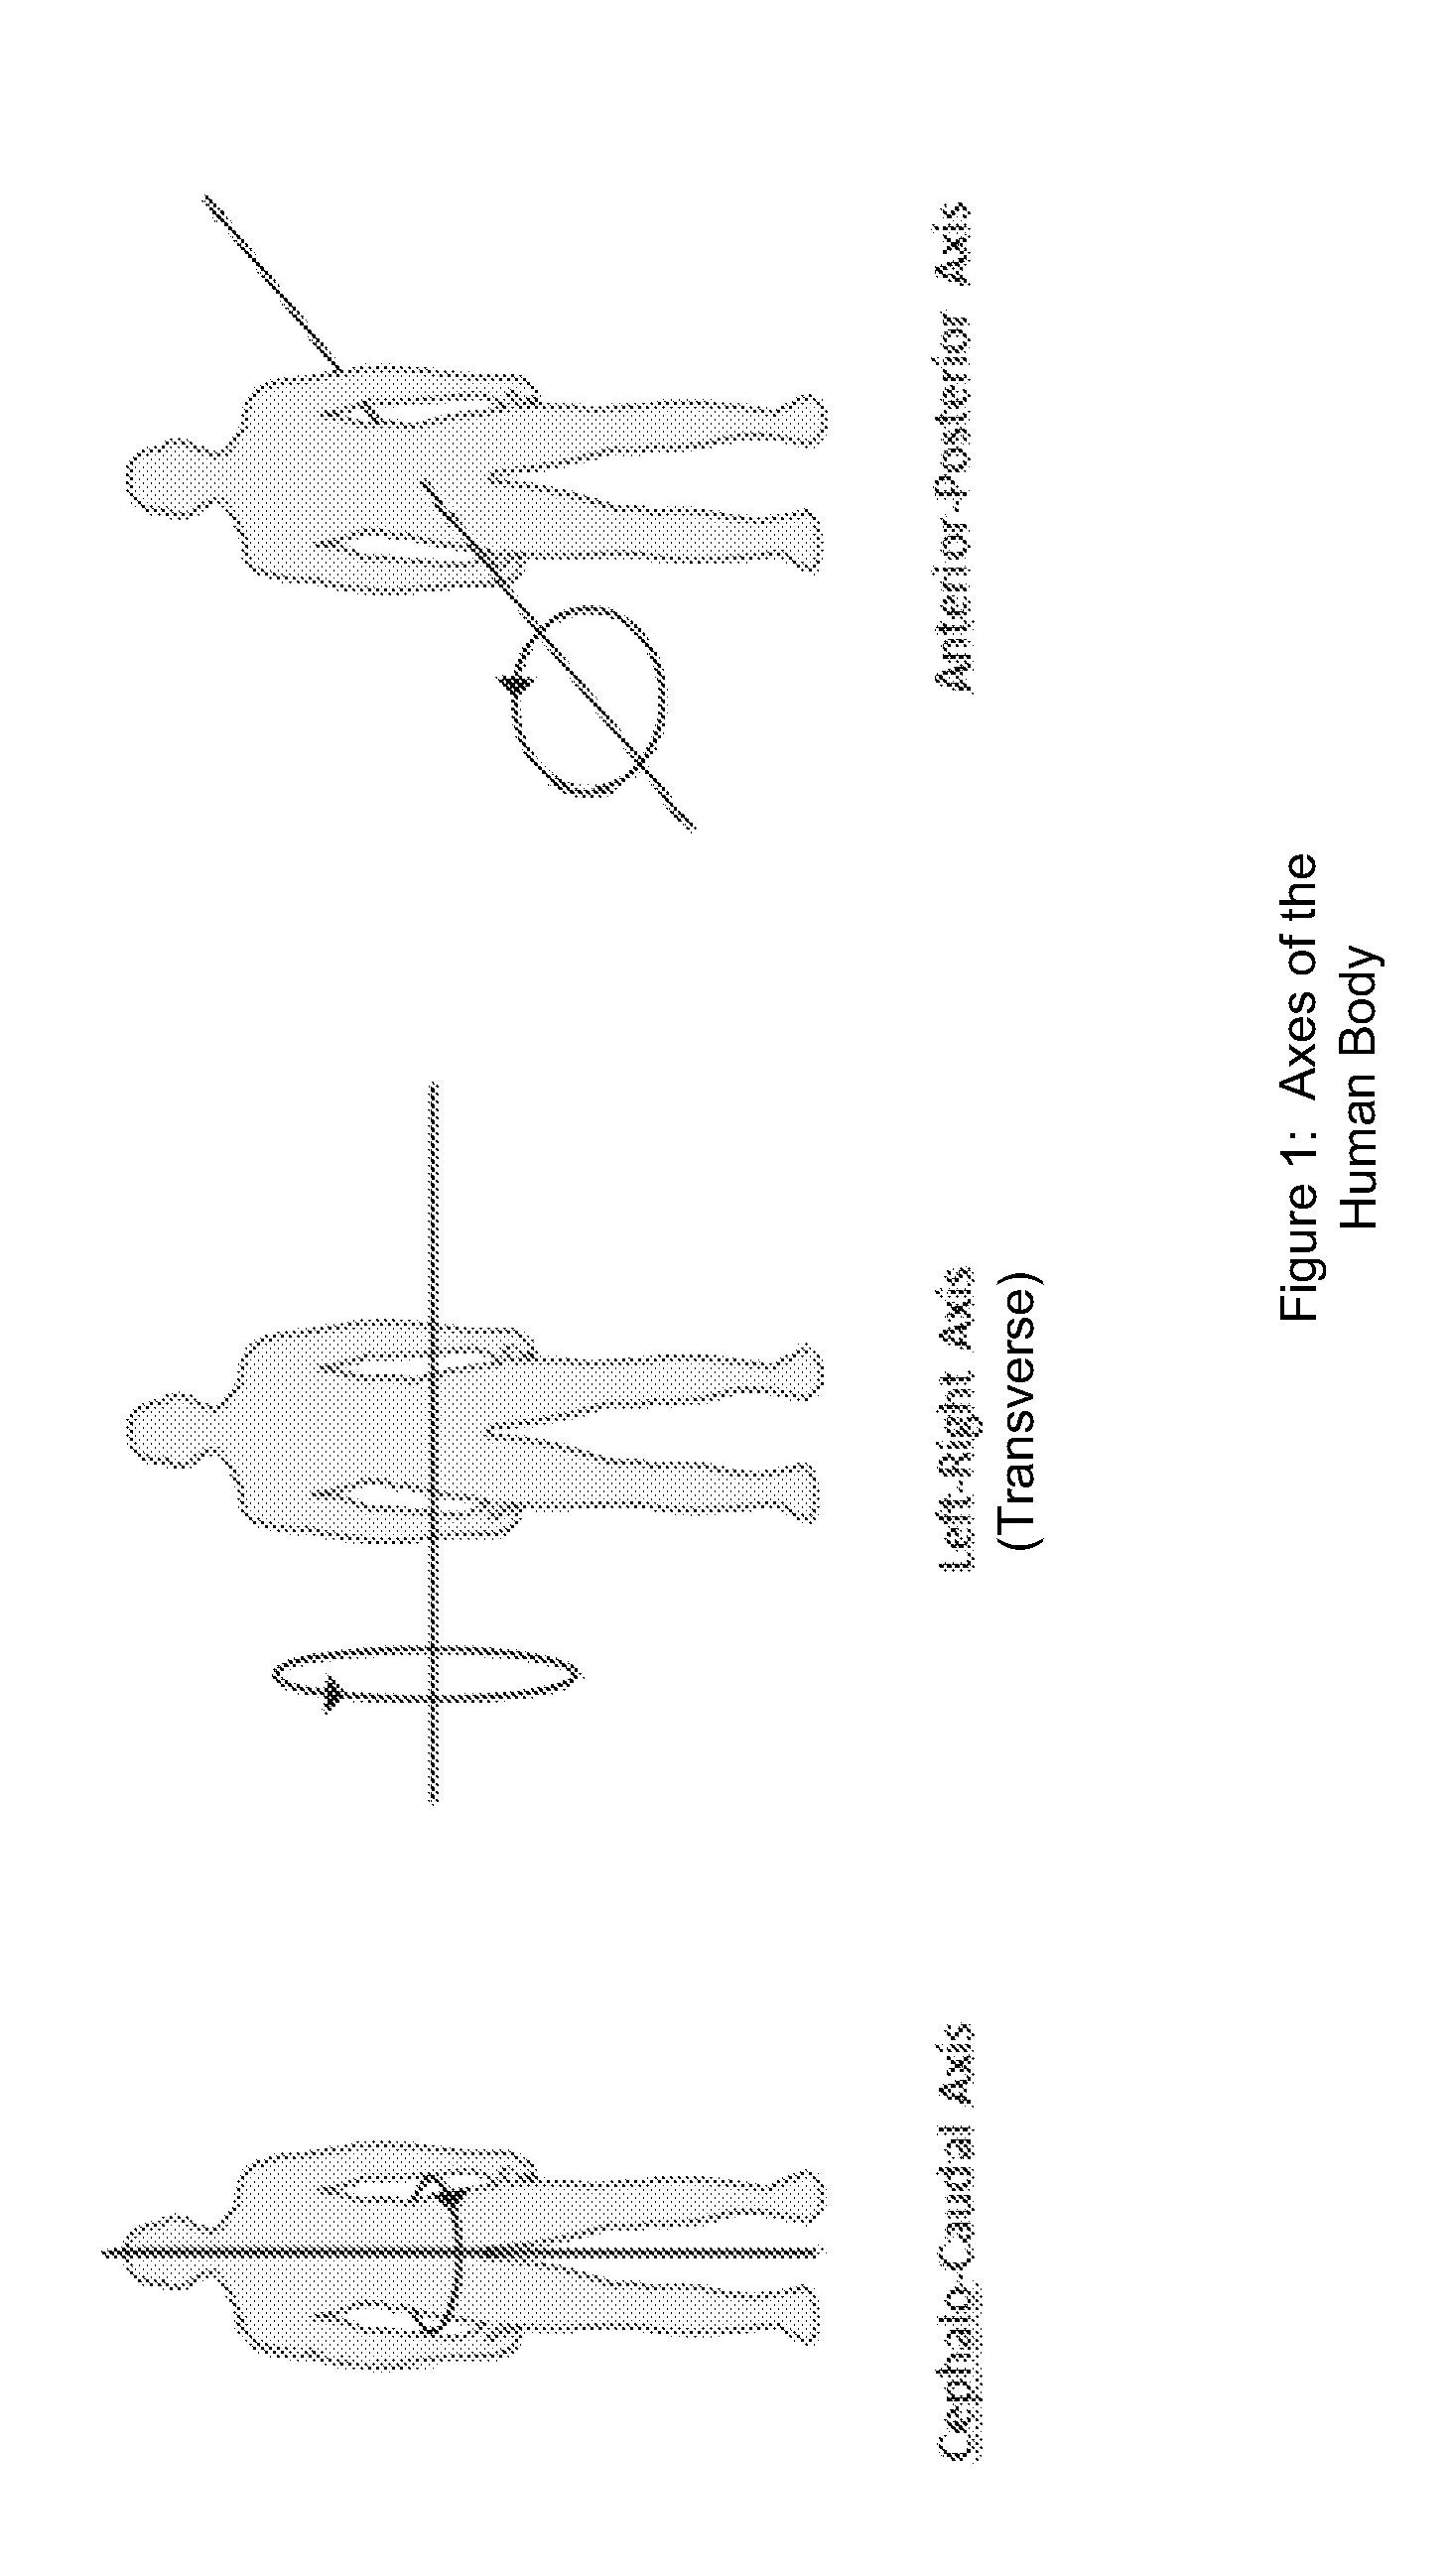 System and method for analyzing patient orientation, location and movement